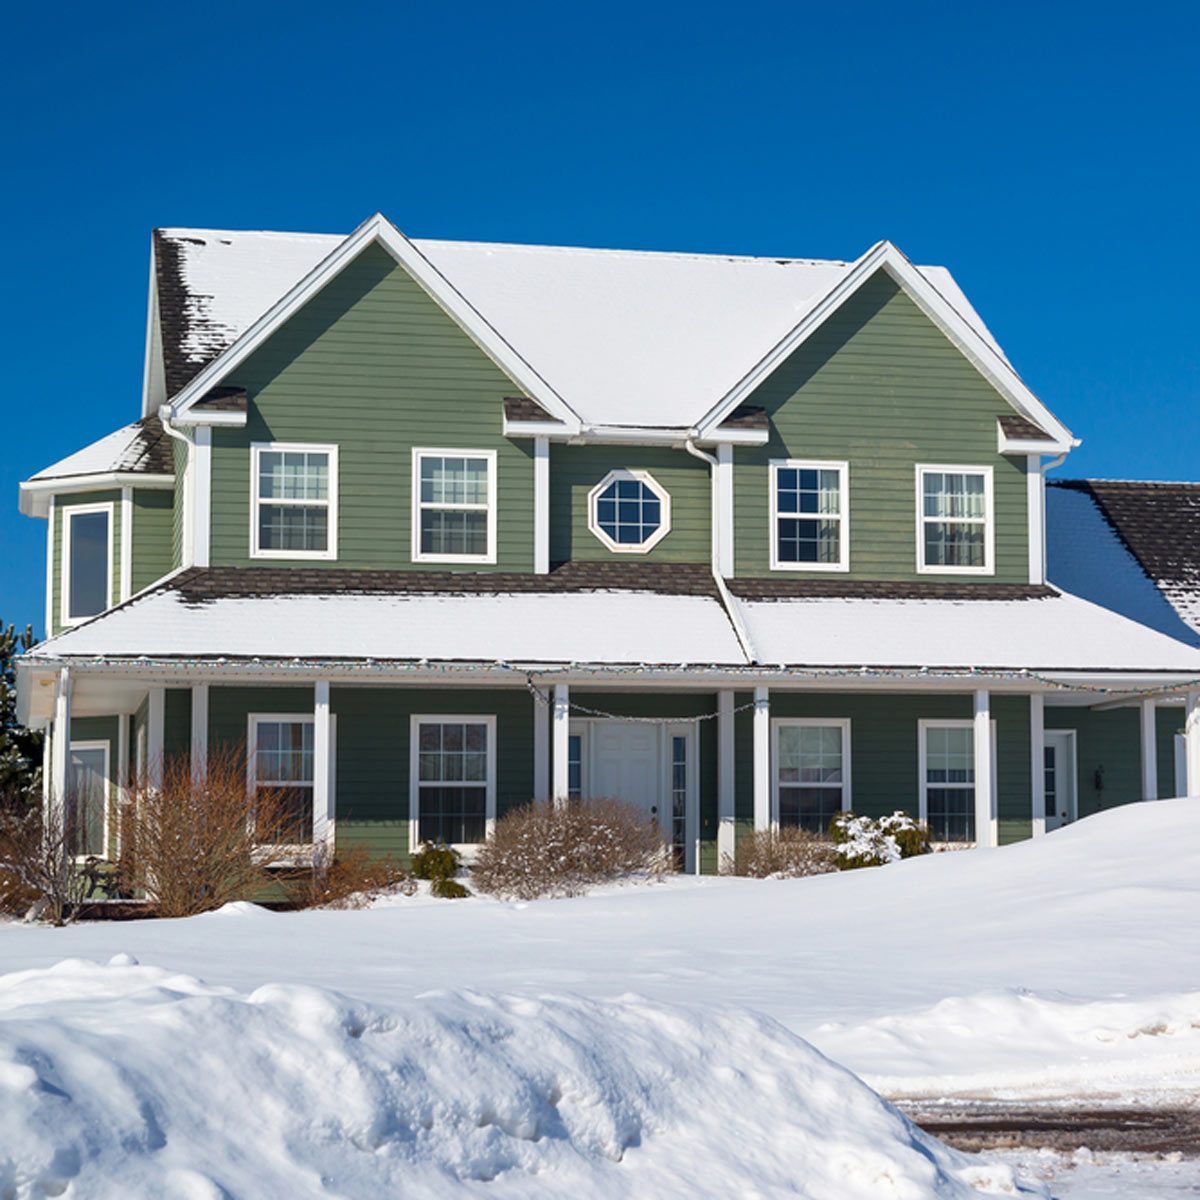 Which Parts of Your Home Are Most Susceptible to Winter Storm Damage?